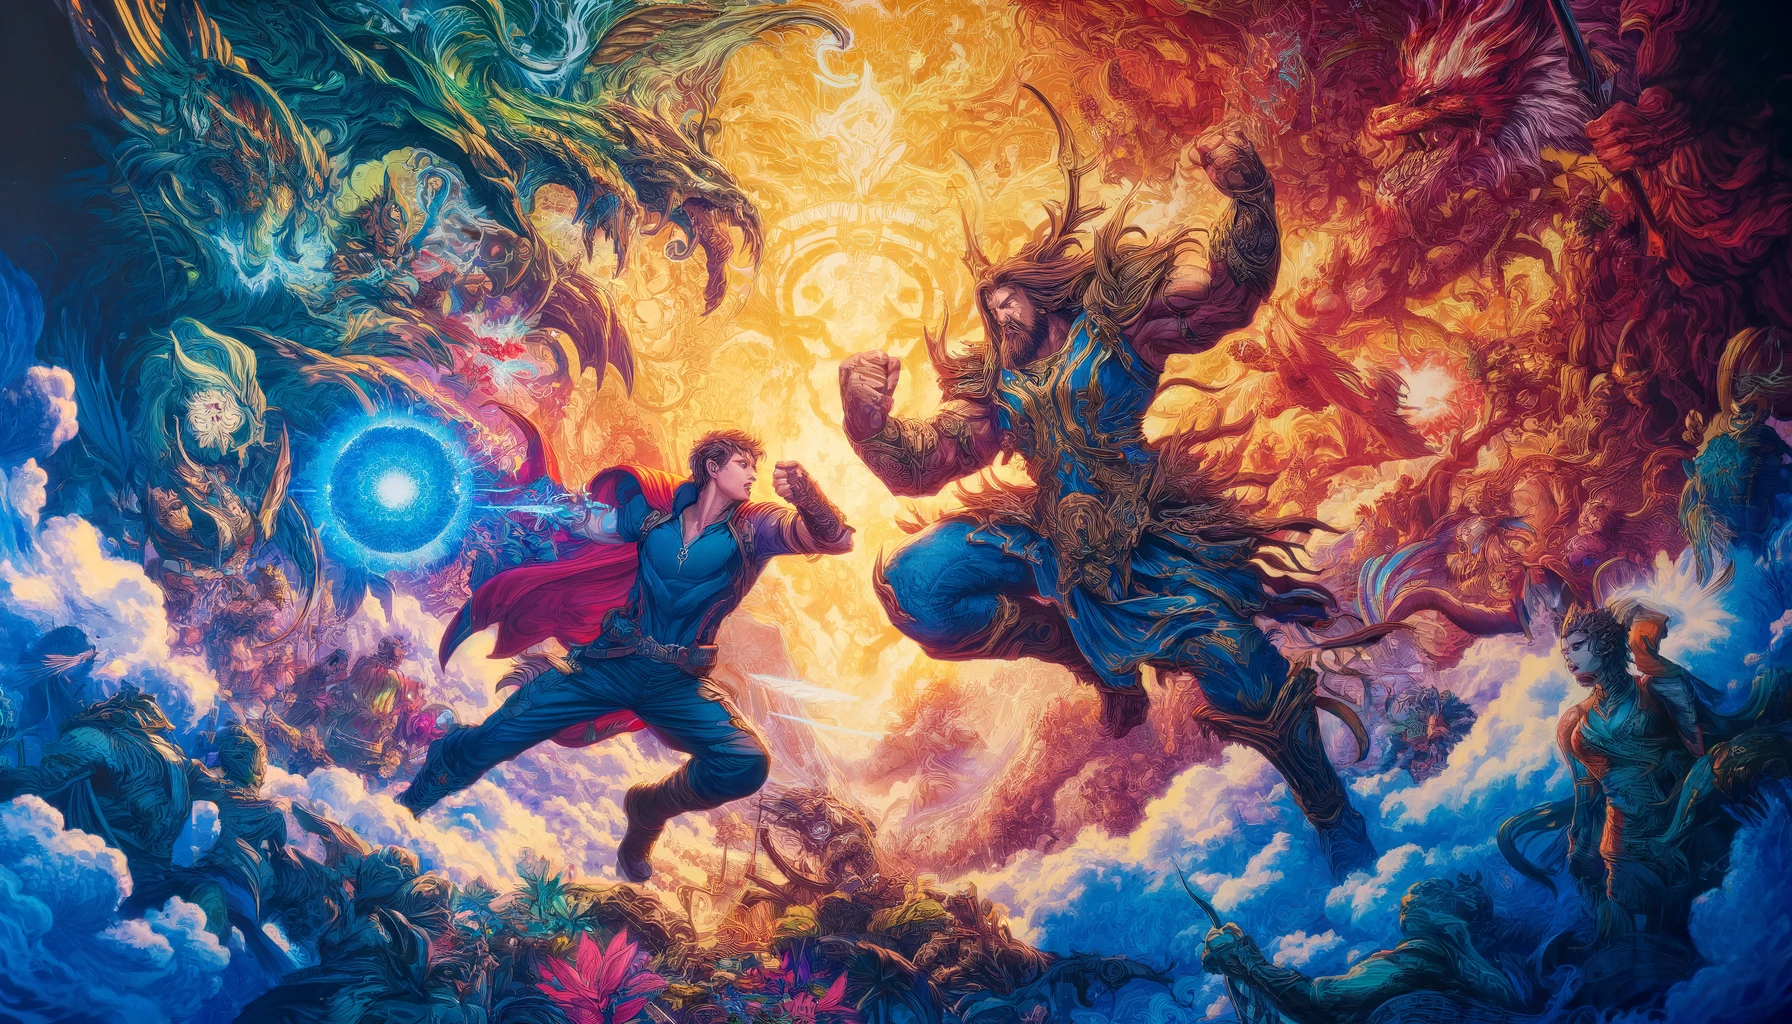 A vibrant, detailed illustration showing a dynamic battle scene in Marvel Snap, with two powerful characters clashing amidst a fantastical and colorful landscape.